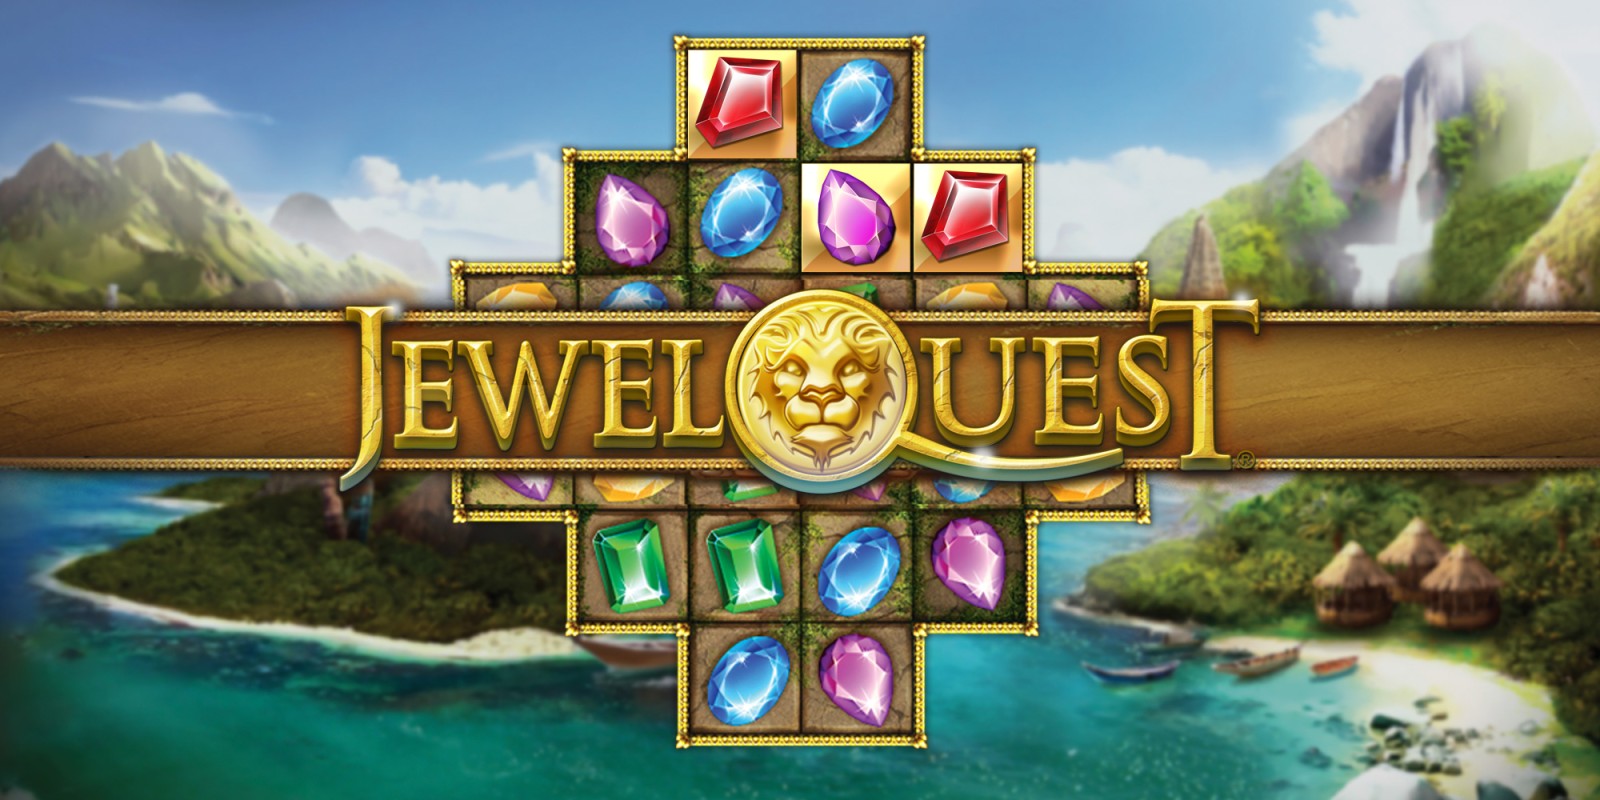 Lucky bets casino 50 free spins